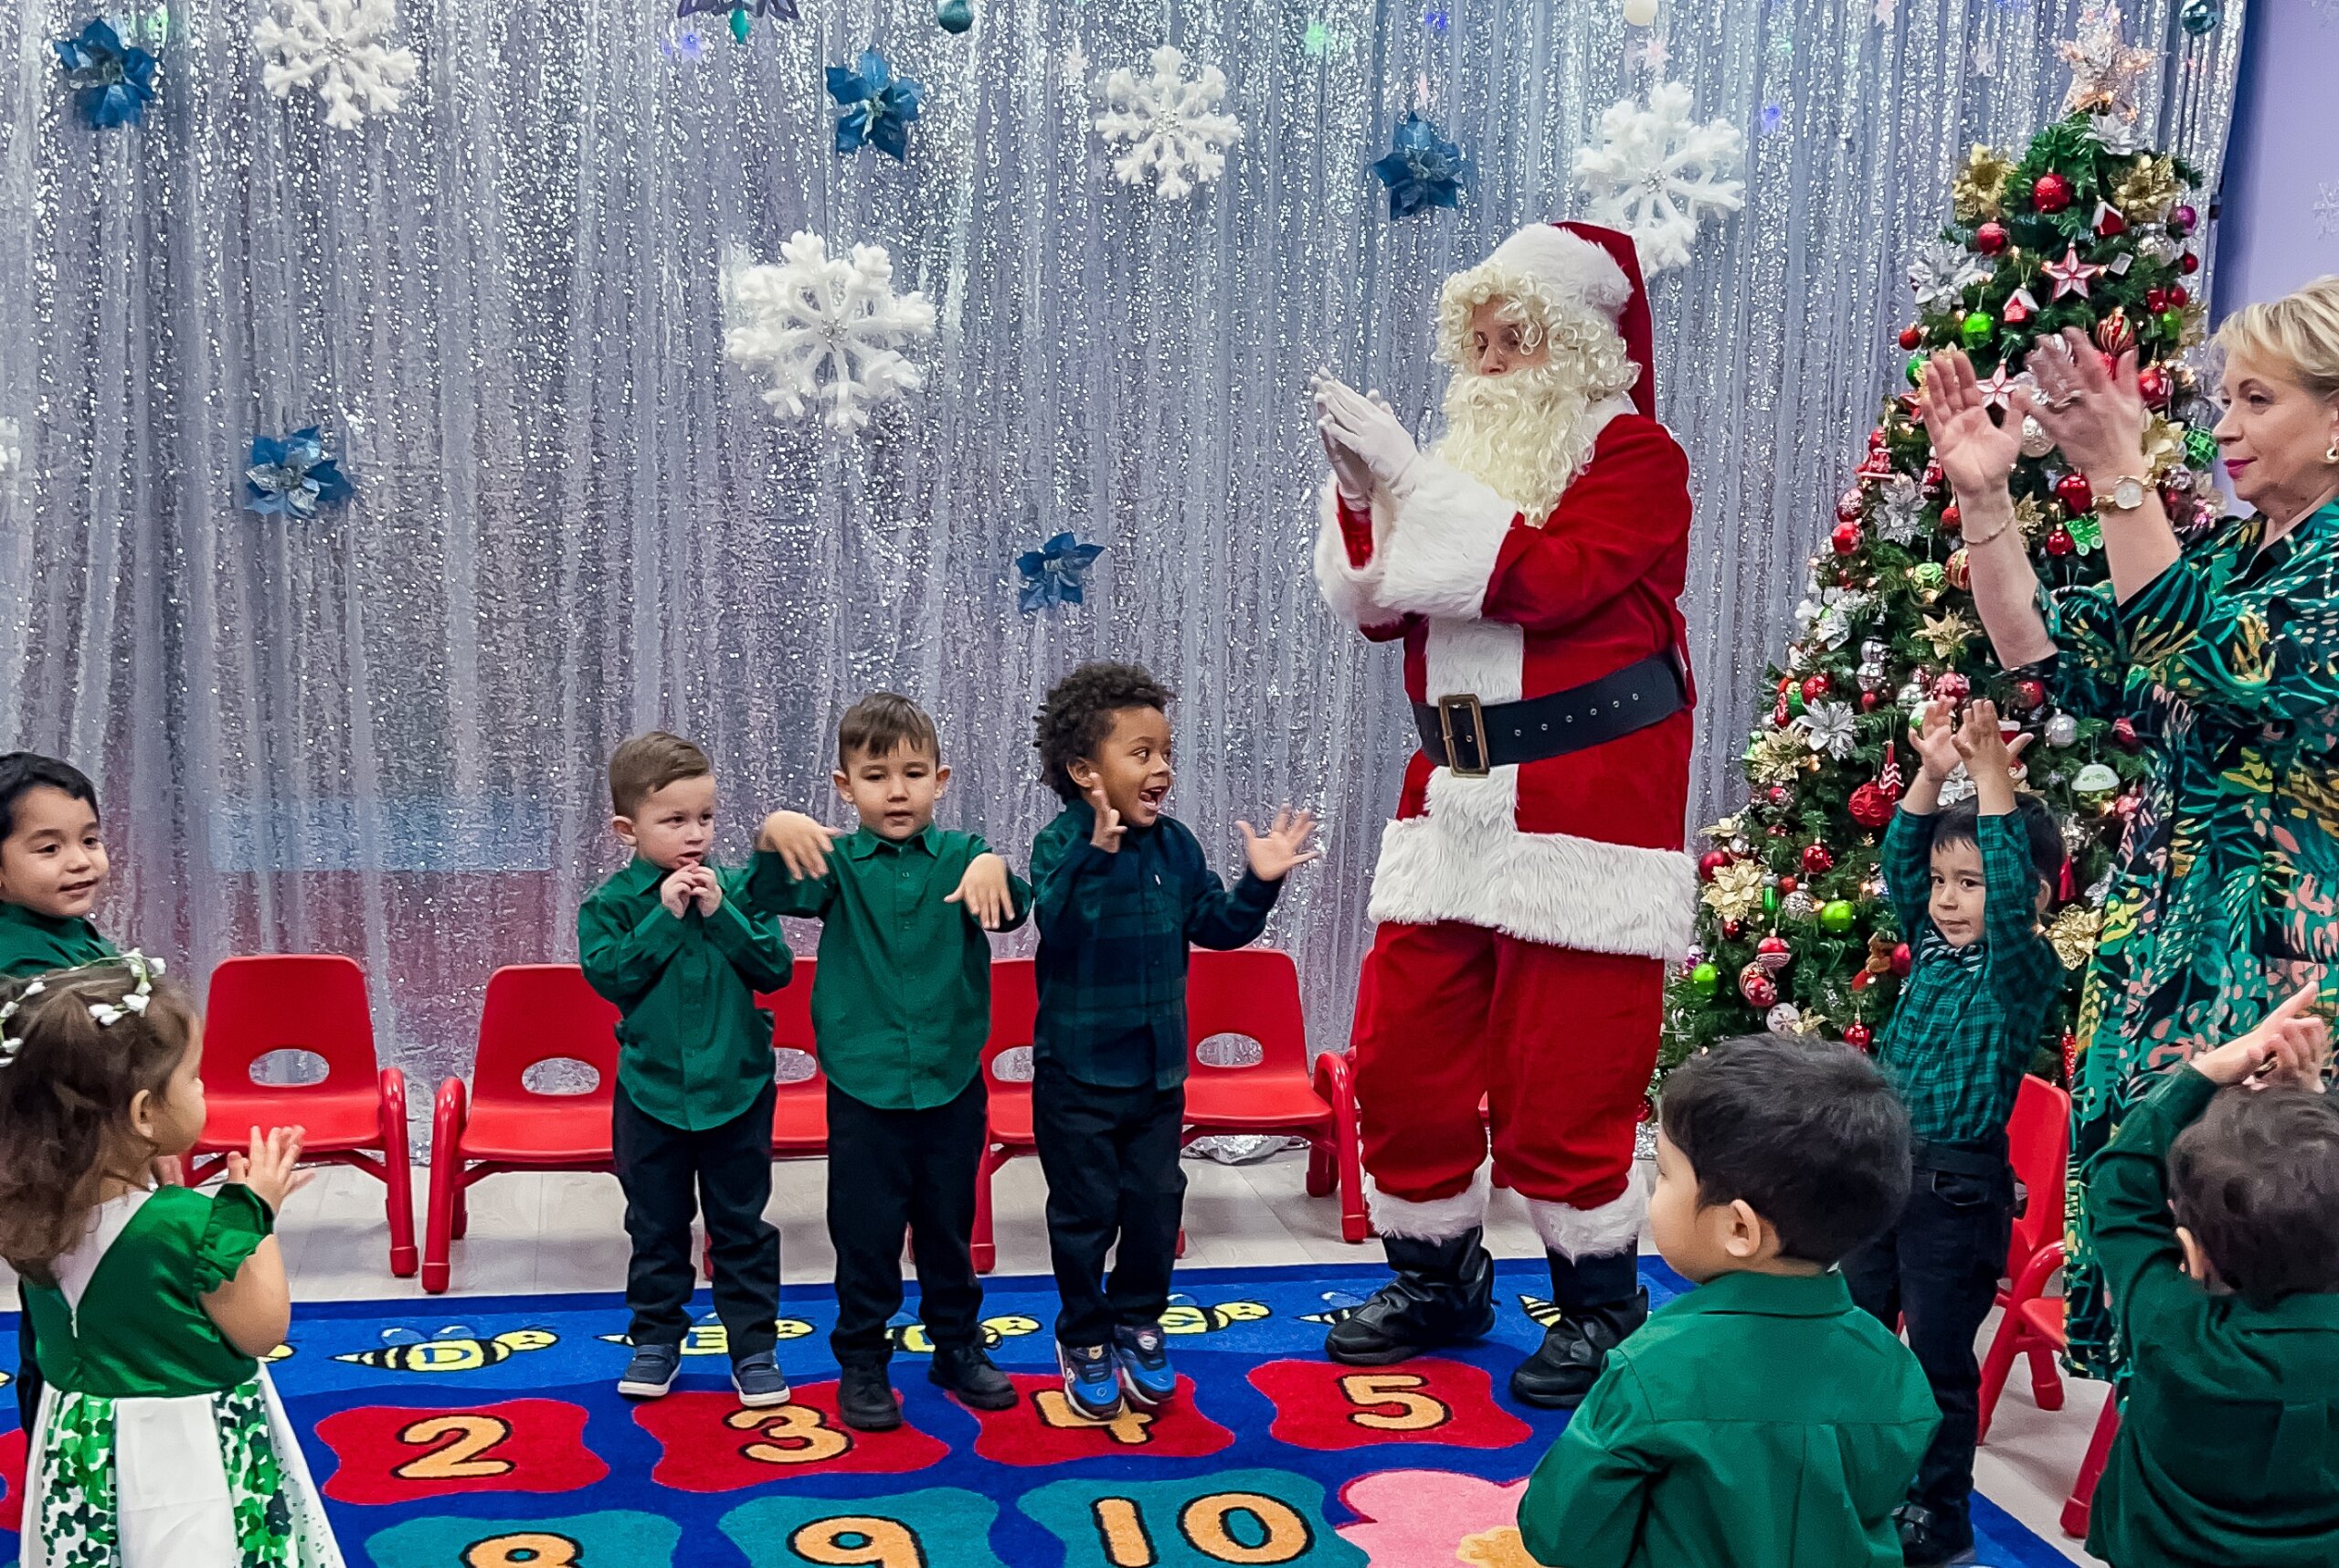 Group of young children dressed in green shirts, standing in a classroom with holiday decorations, interacting with a person dressed as Santa Claus and a teacher